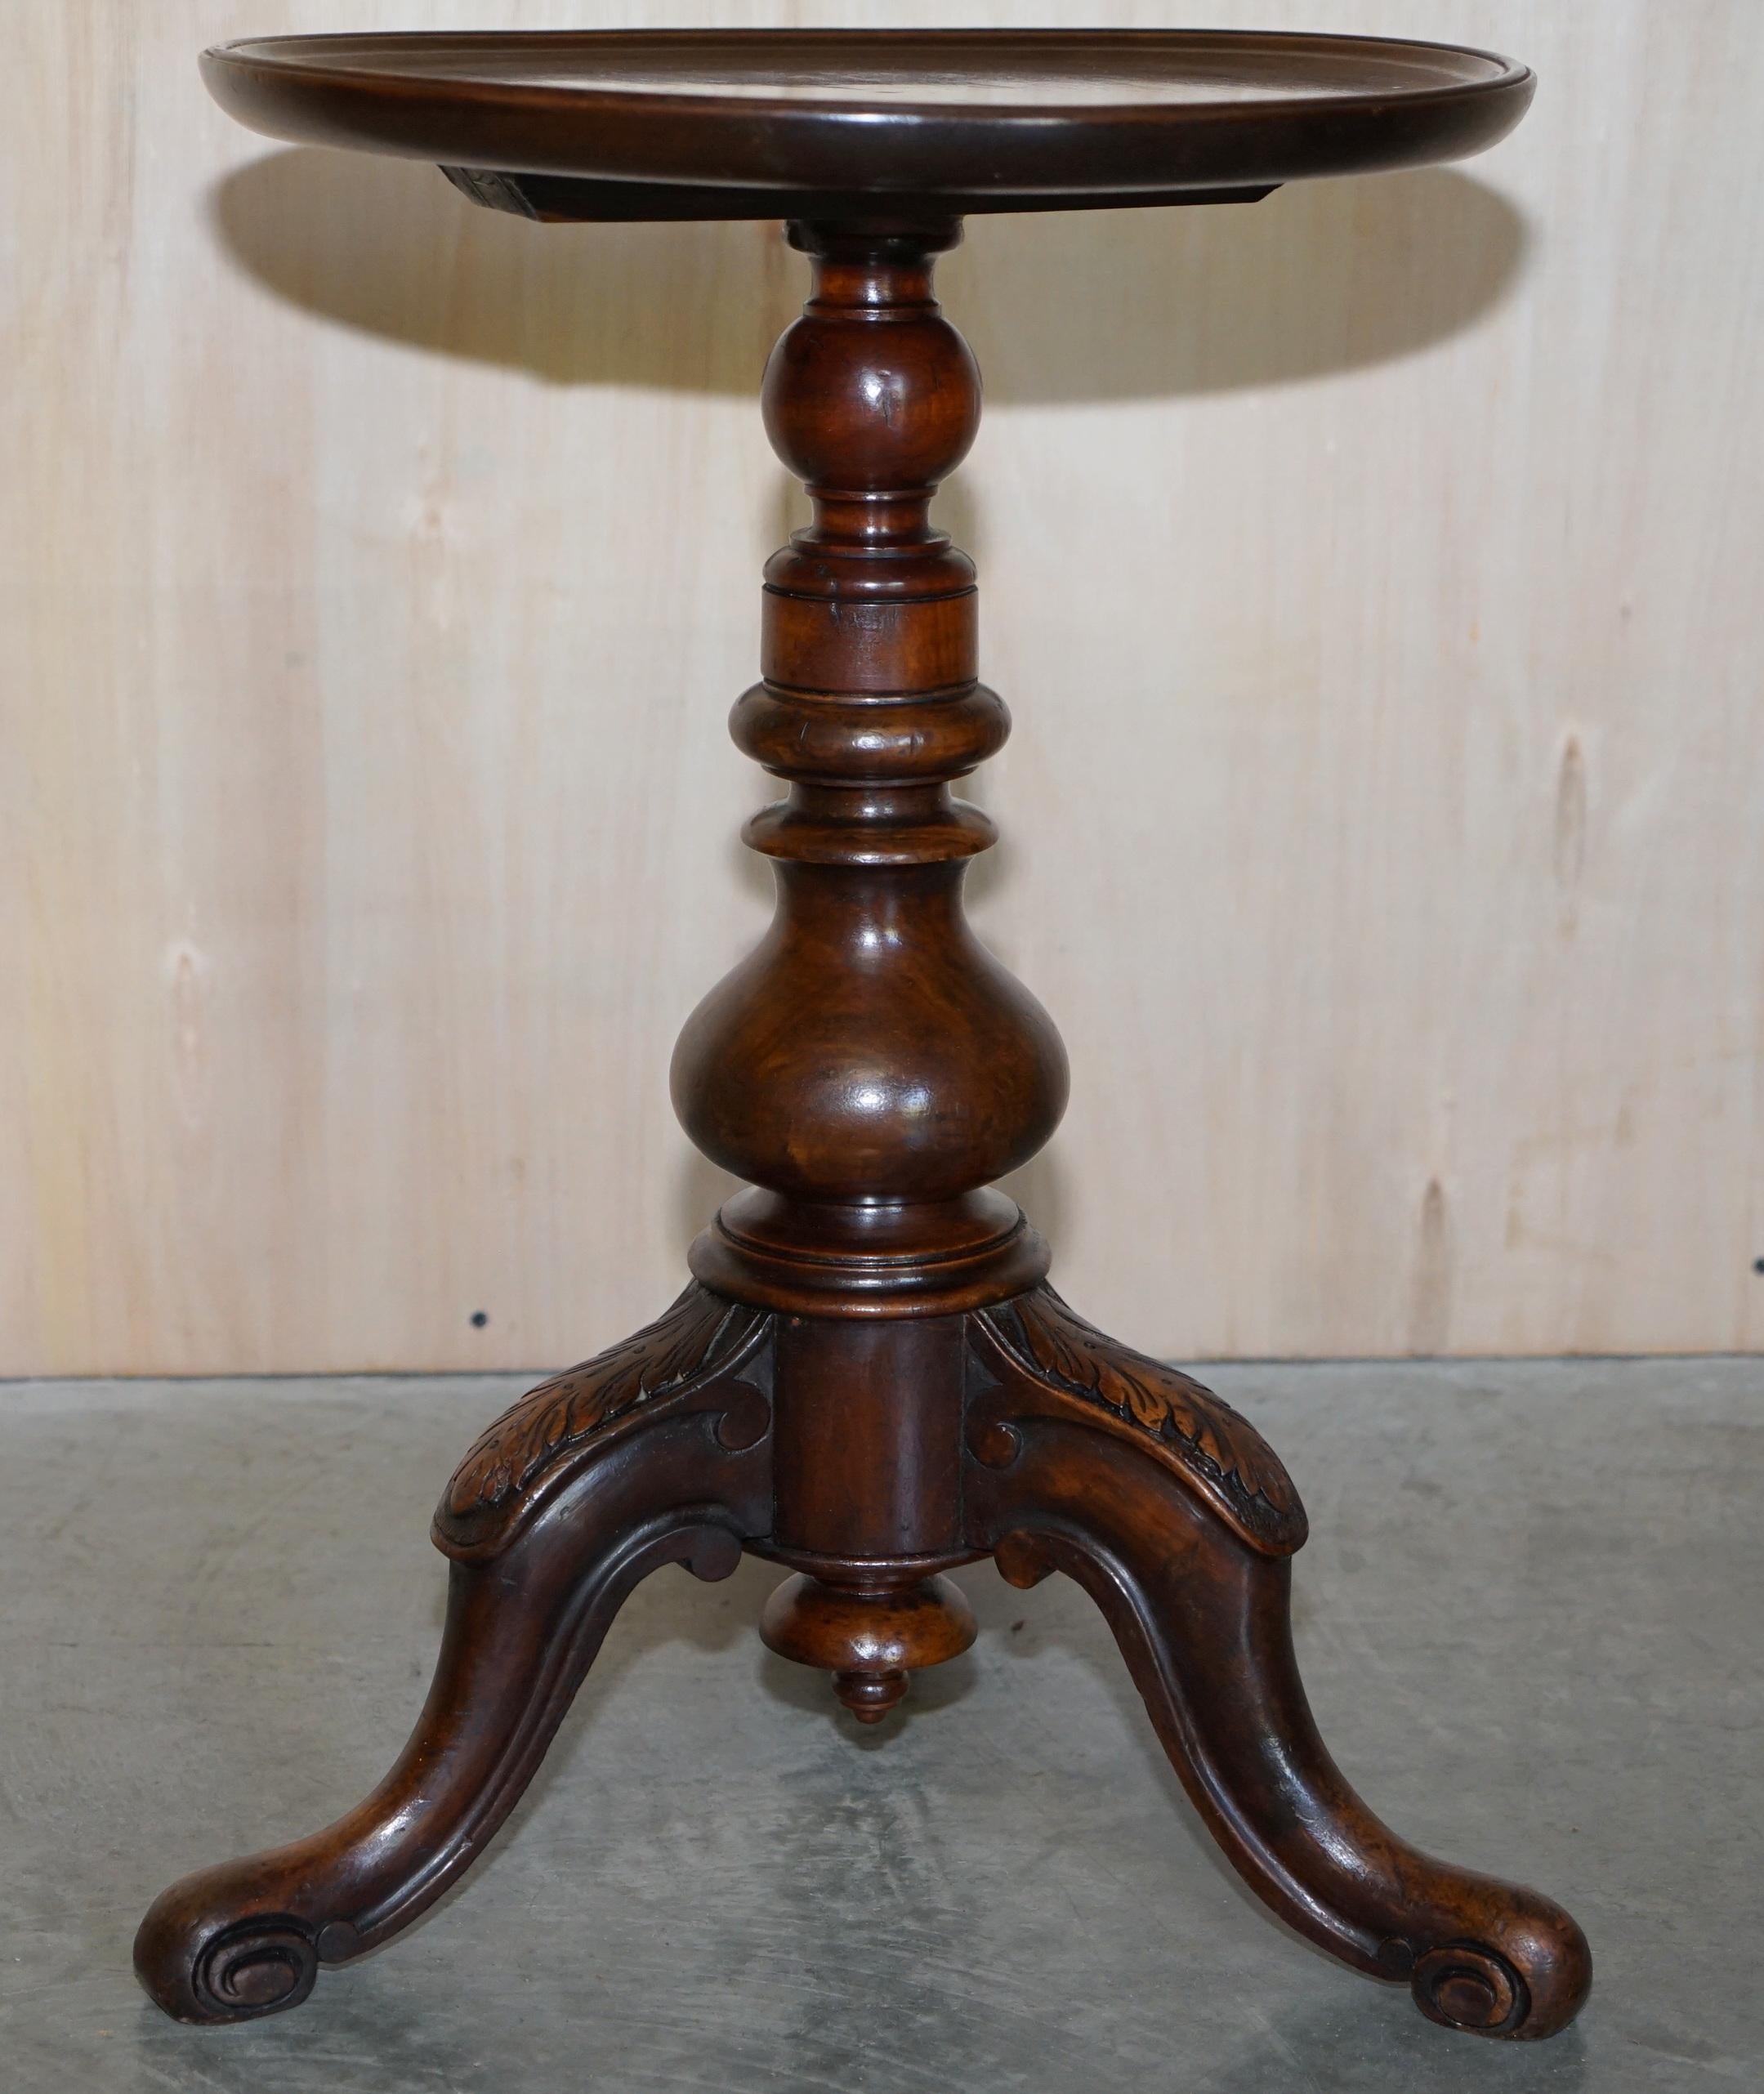 Hand-Crafted circa 1860 Antique Victorian Gillows Kettle Stand Tripod Mahogany & Walnut Table